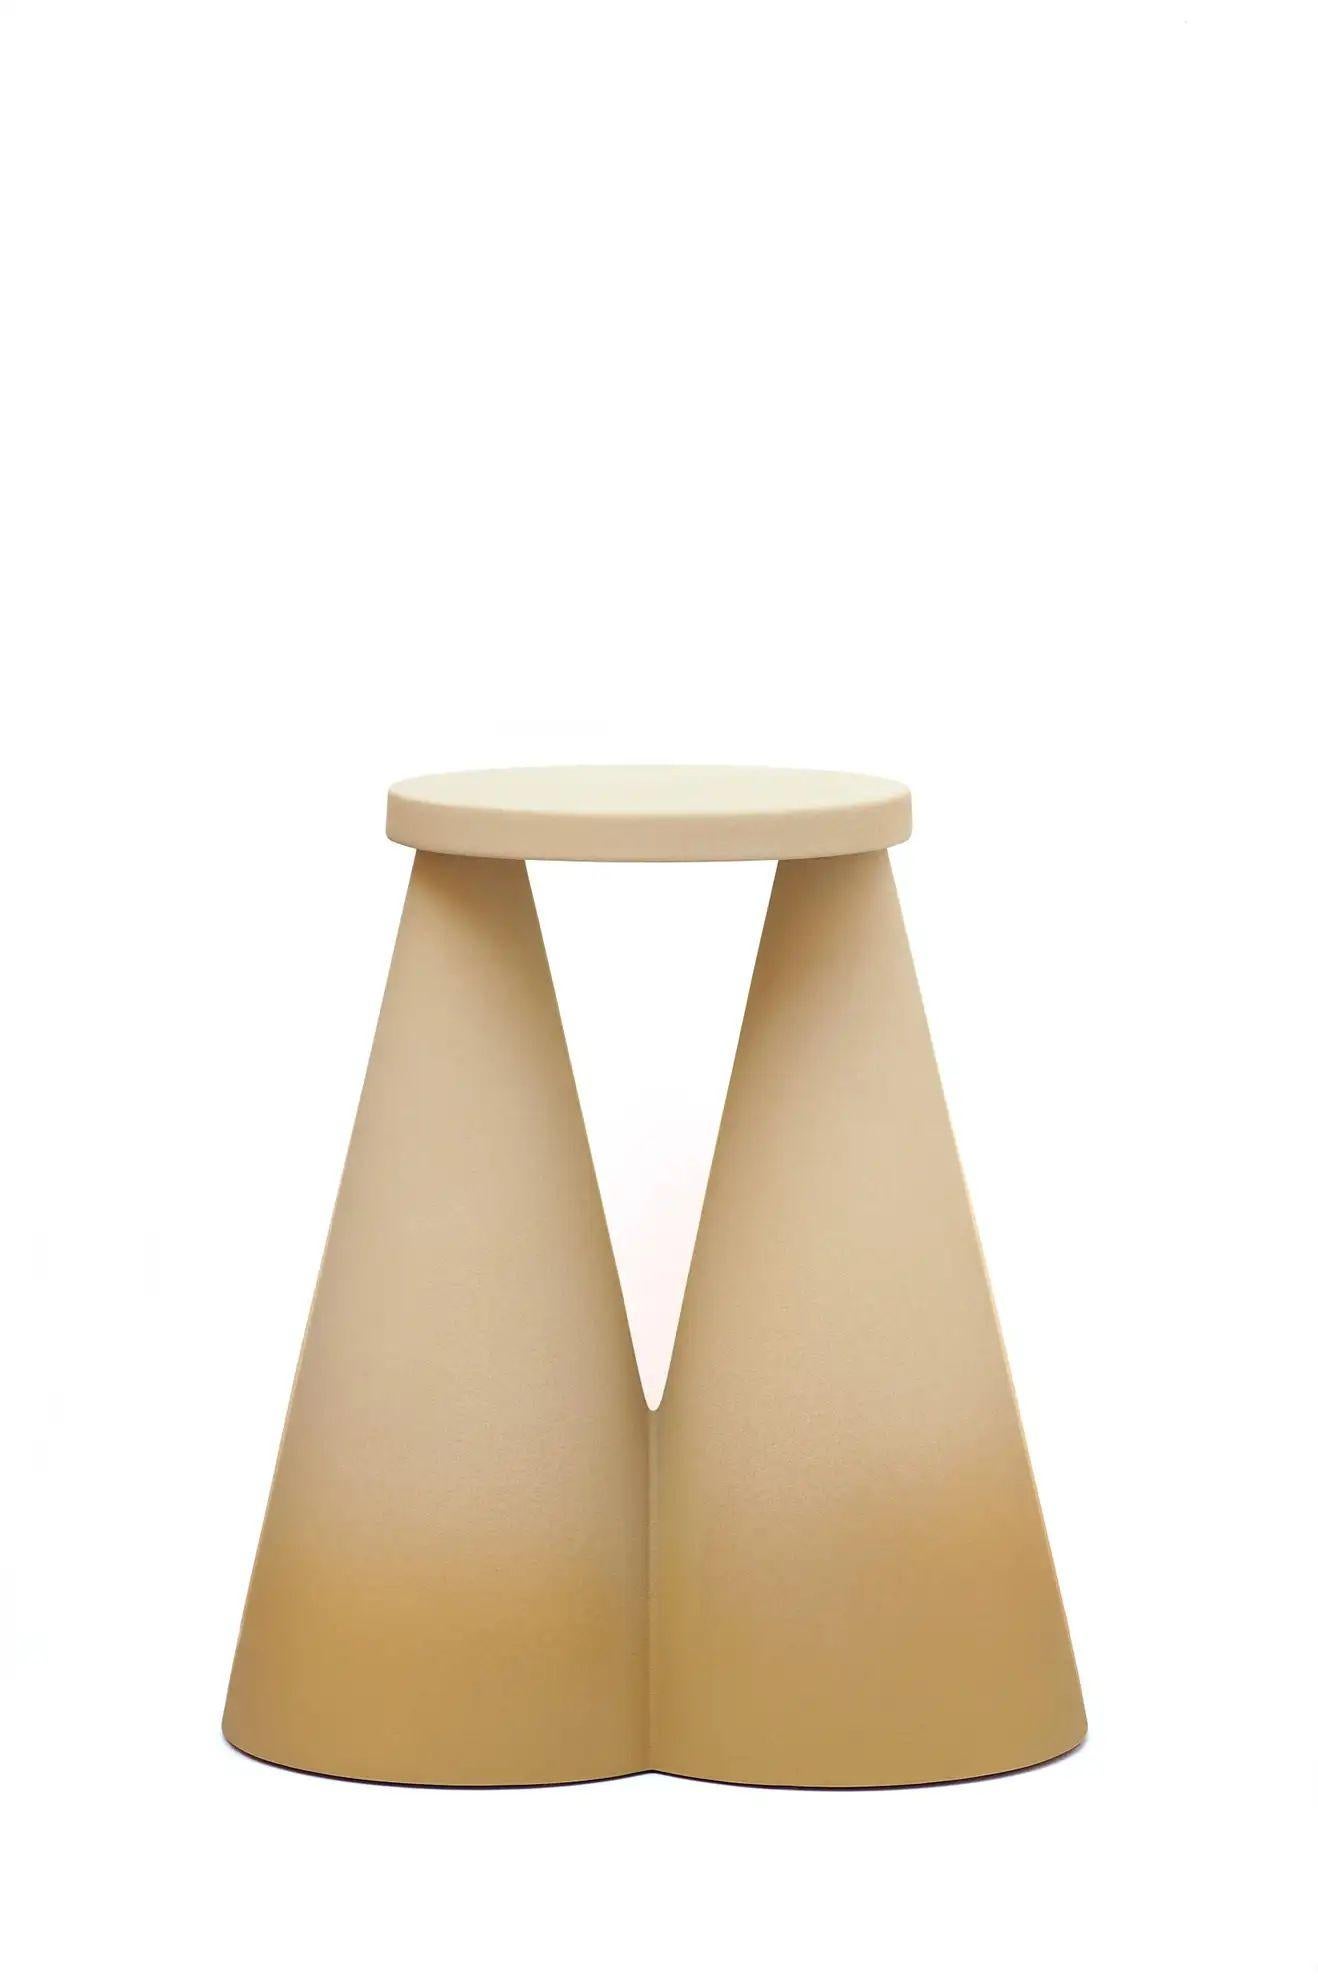 Pair of Isola Side Table by Cara Davide 12